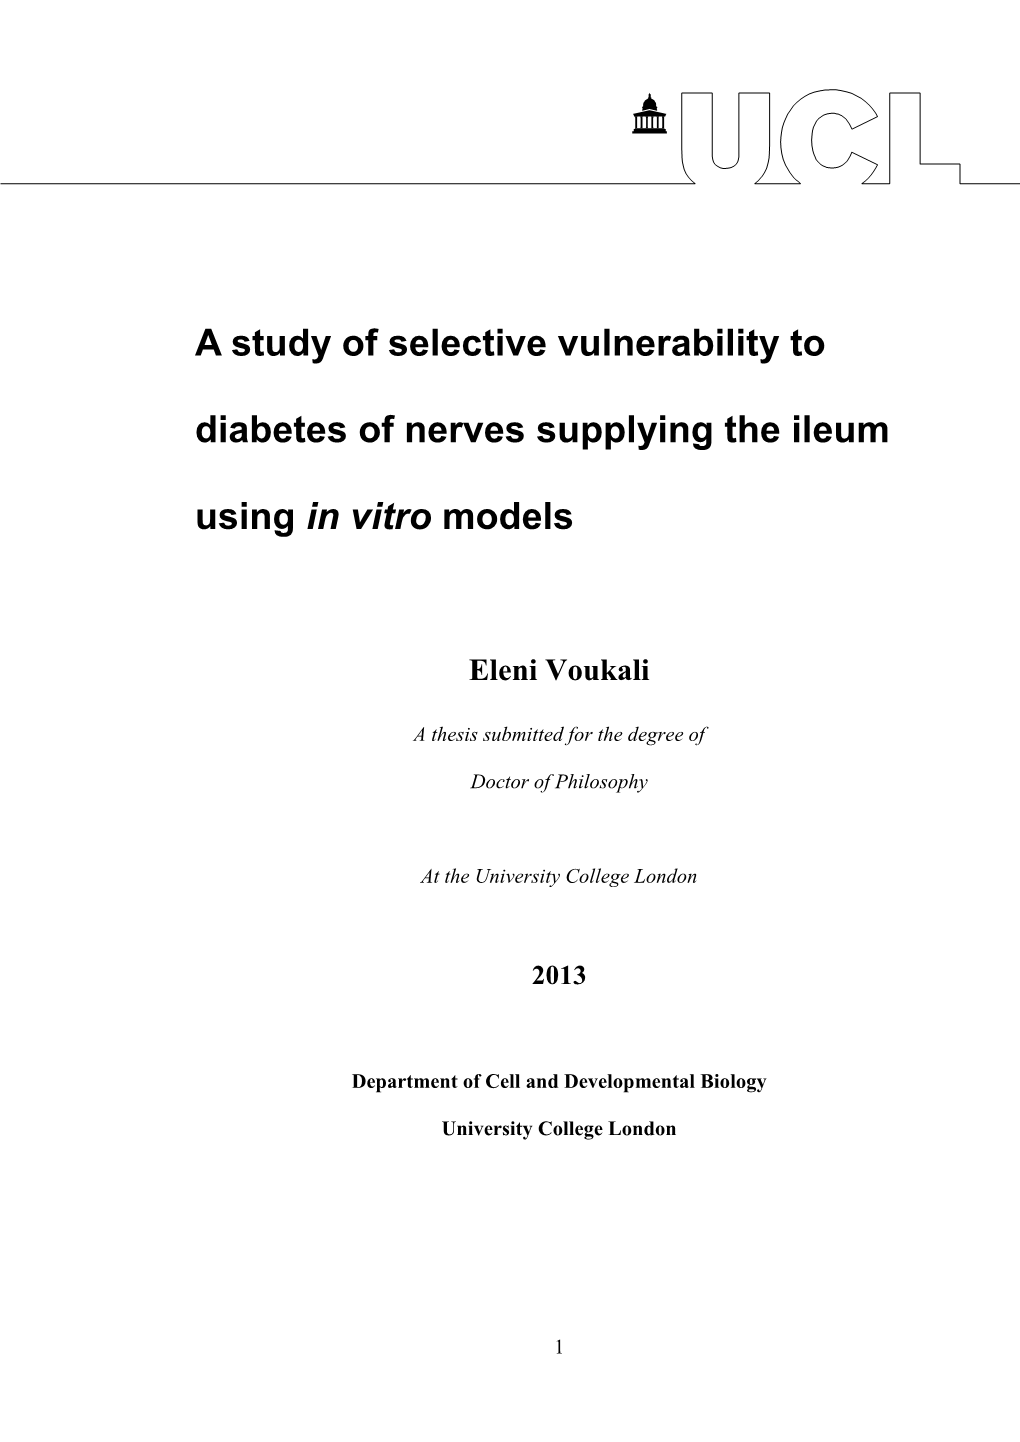 A Study of Selective Vulnerability to Diabetes of Nerves Supplying the Ileum Using in Vitro Models